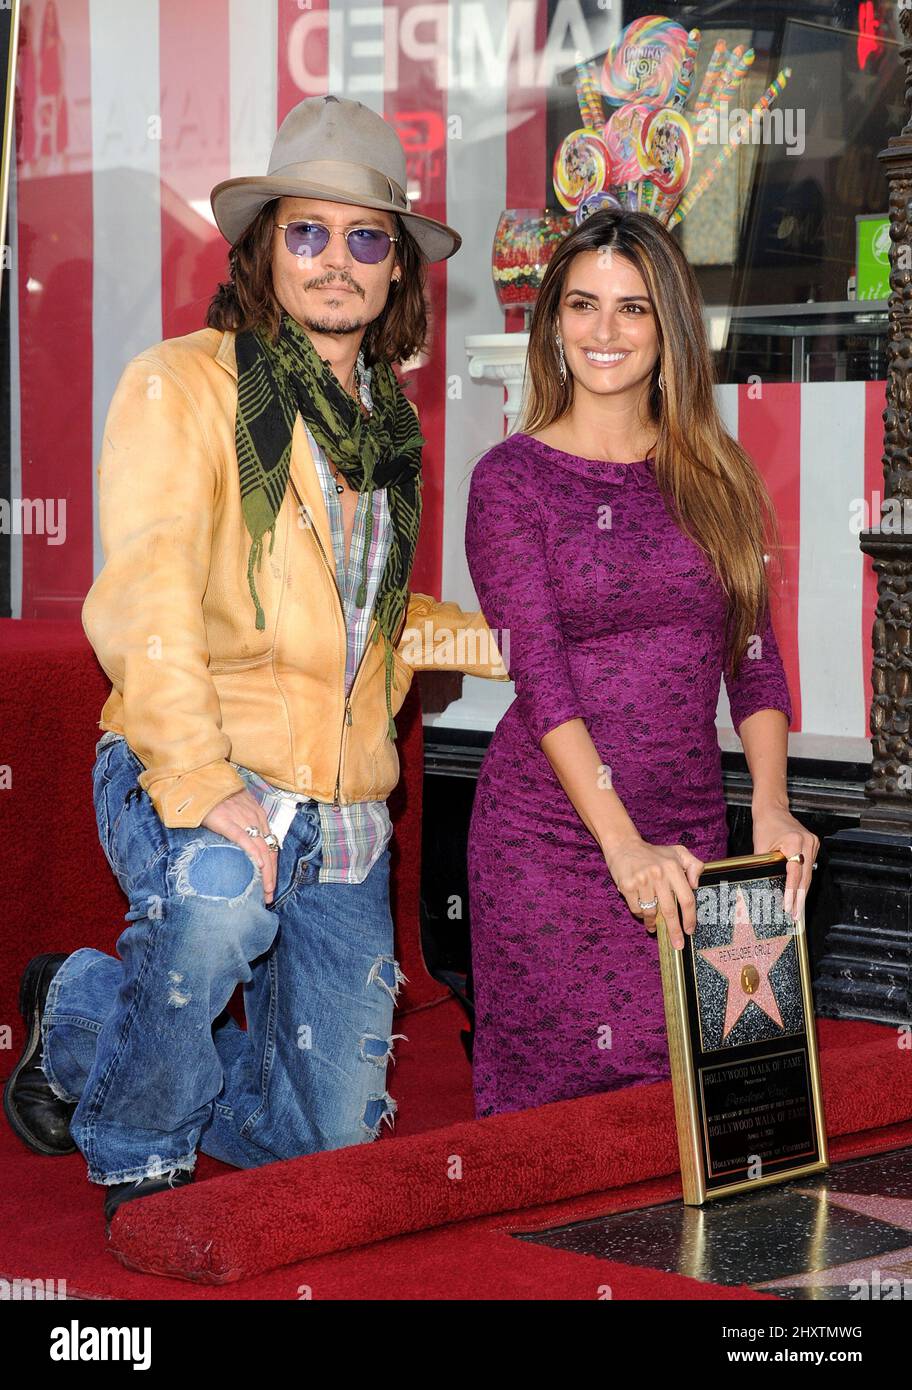 Spanish actress and Oscar winner Penelope Cruz (R) poses with US actor Johnny Depp (L) as she is honoured with a star on the Hollywood Walk of Fame in Hollywood, California, USA, 01 April 2011. Cruz received the 2436th star on the Hollywood Walk of Fame. Stock Photo